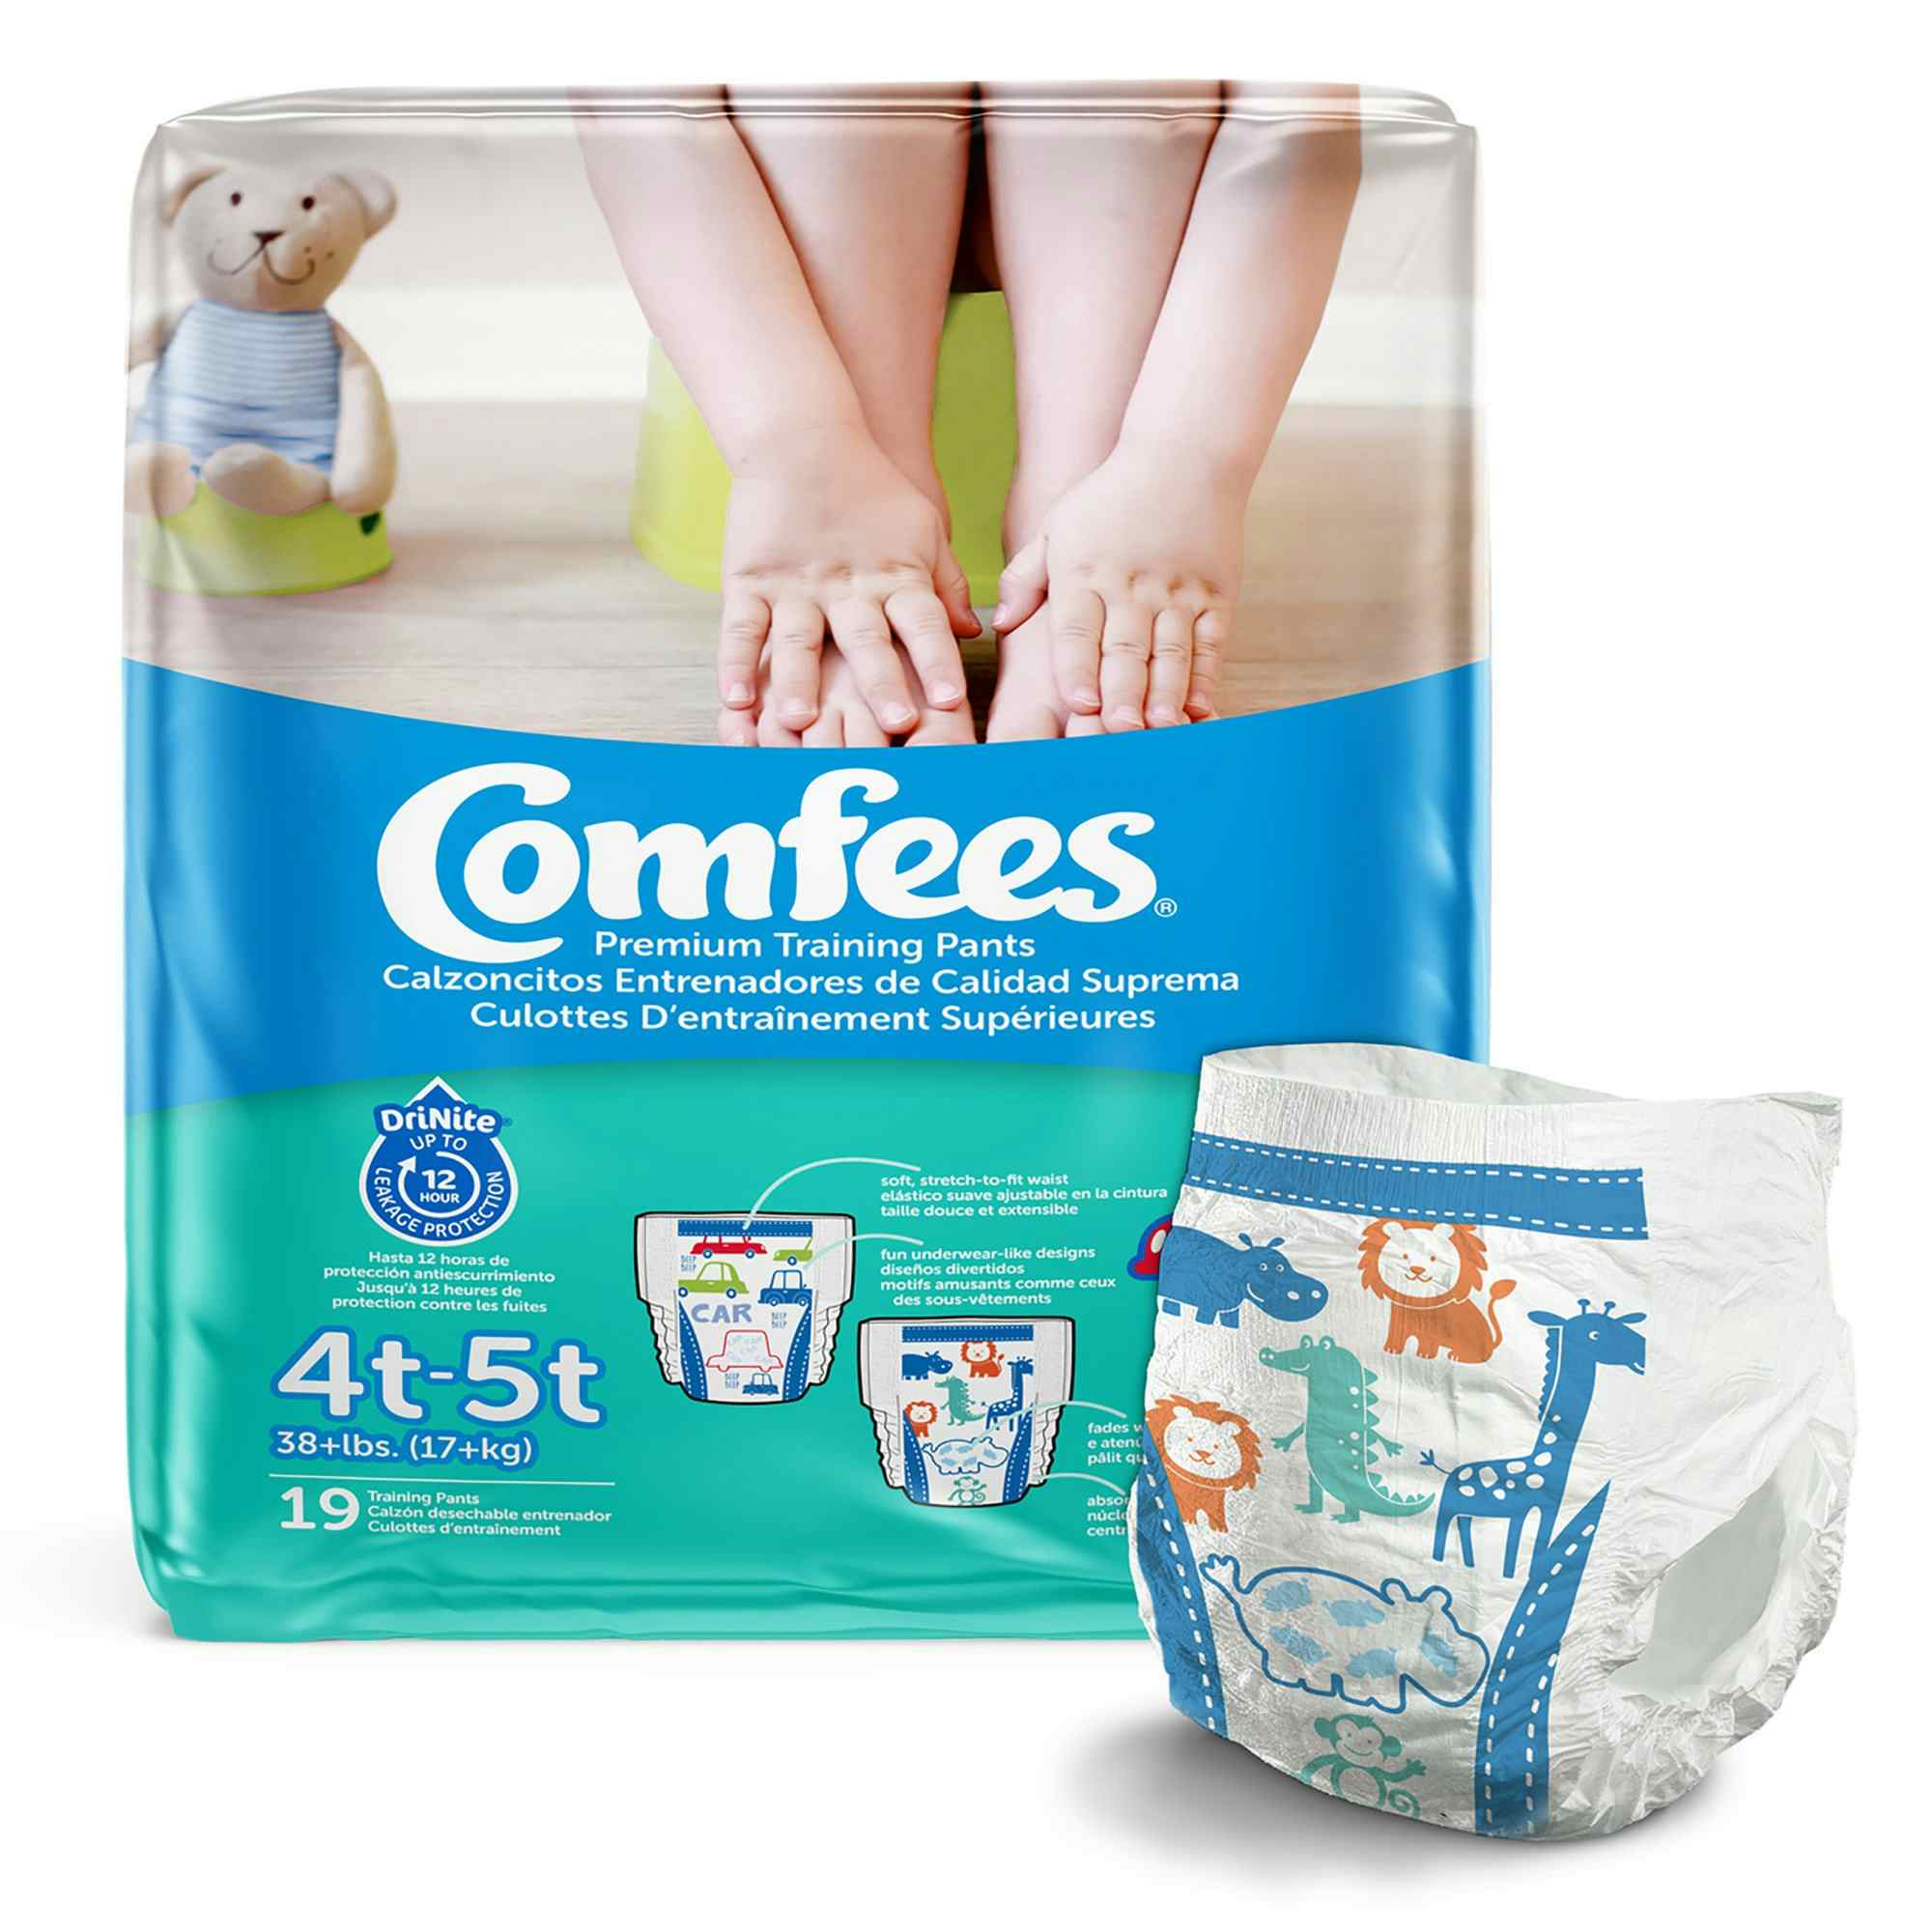 Comfees Pull-Up Premium Training Pants, Moderate Absorbency, CMF-B4, 4T-5T (38lbs+) - Case of 114 (6 Bags)